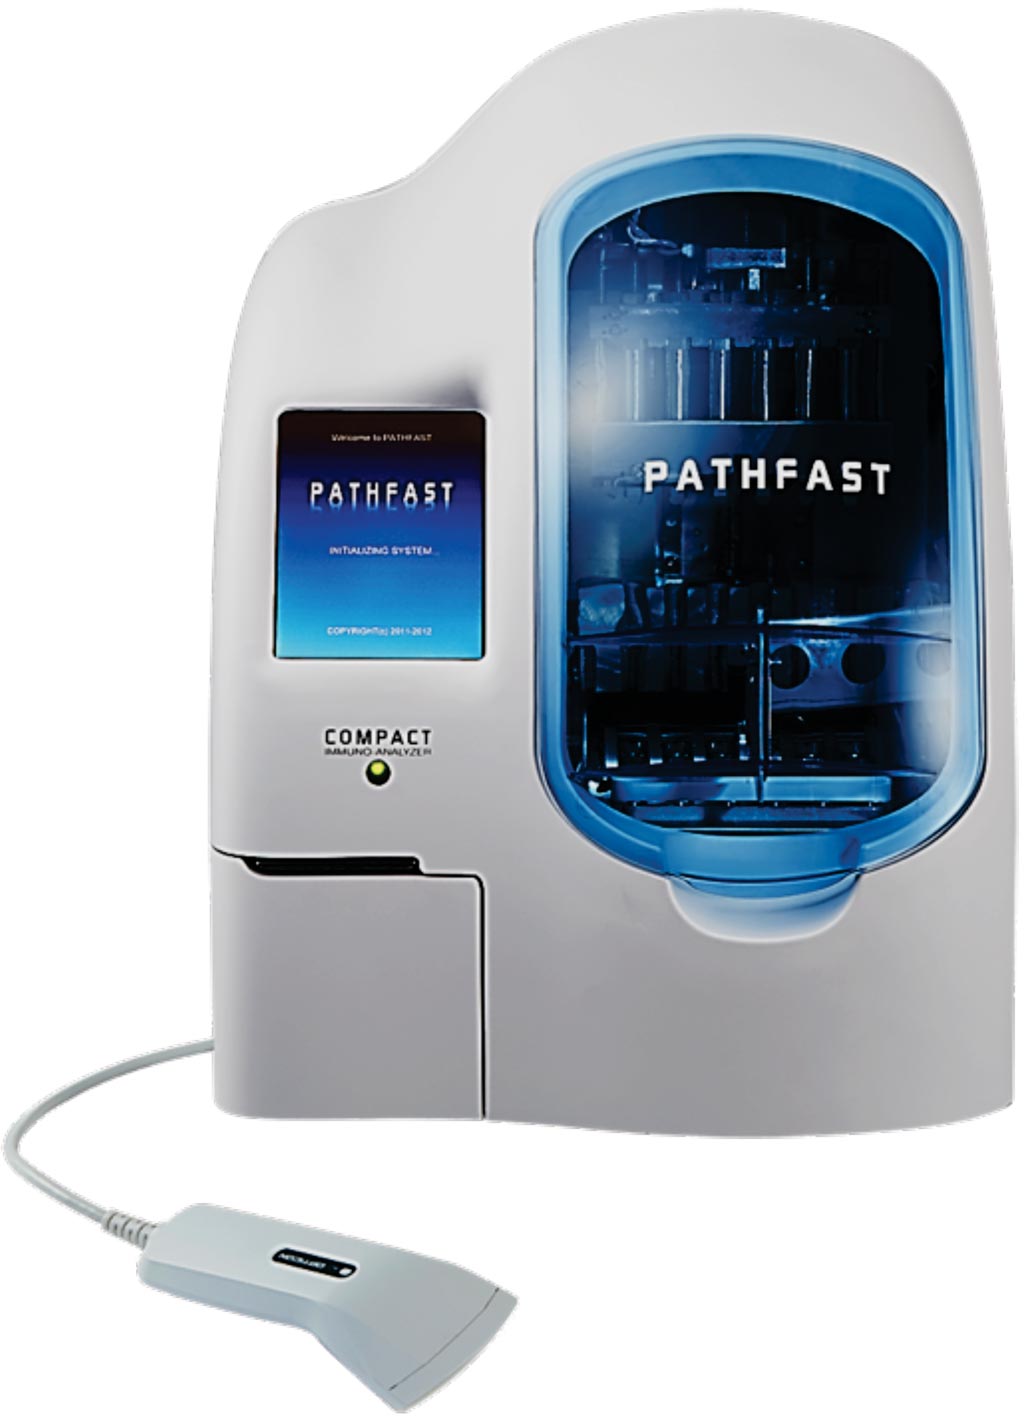 Image: The compact PATHFAST Immunoanalyzer used for the presepsin point-of-care assay (Photo courtesy of LSI Medience Corporation).